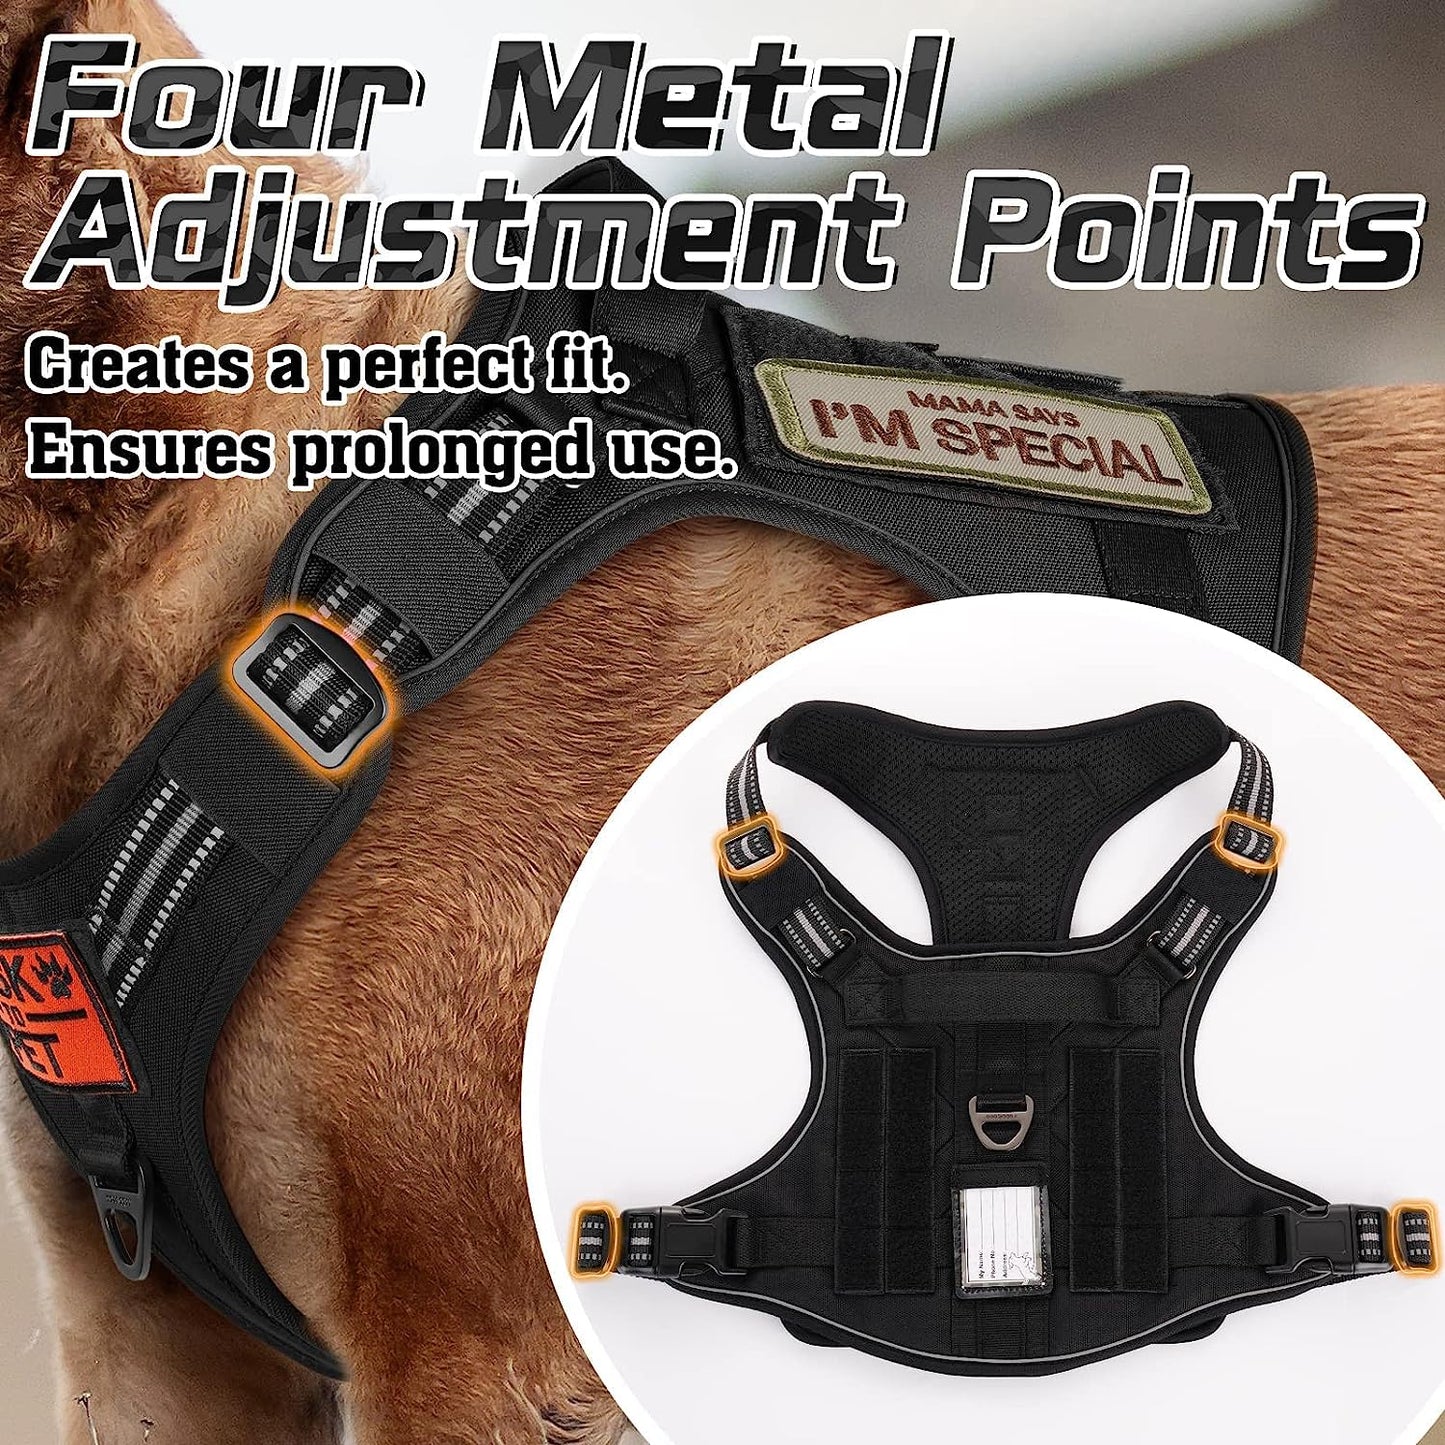 Rabbitgoo Tactical Dog Harness No Pull, Military Dog Vest Harness with Handle & Molle, Easy Control Service Dog Harness for Large Dogs Training Walking, Adjustable Reflective Pet Harness, Black, L Animals & Pet Supplies > Pet Supplies > Dog Supplies > Dog Apparel GLOBEGOU CO.,LTD   